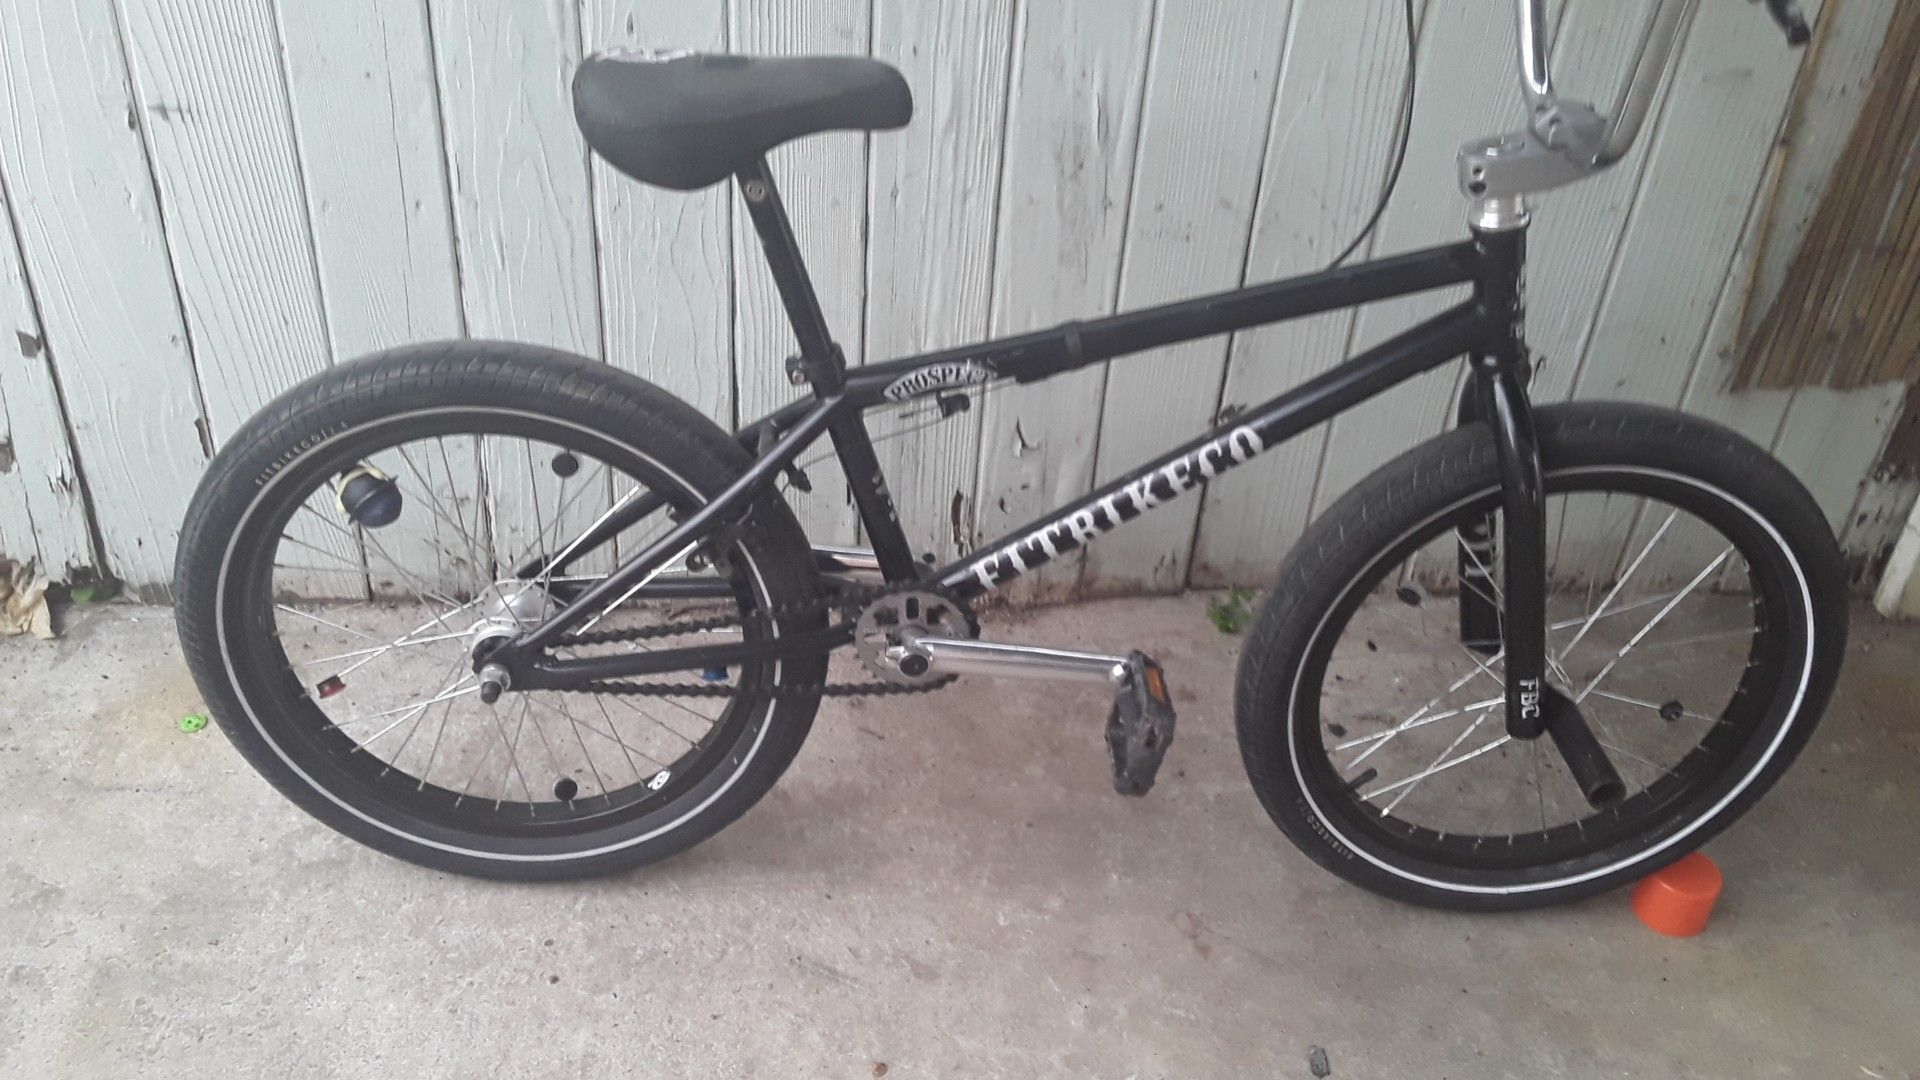 Nice bmx prospect in good condition